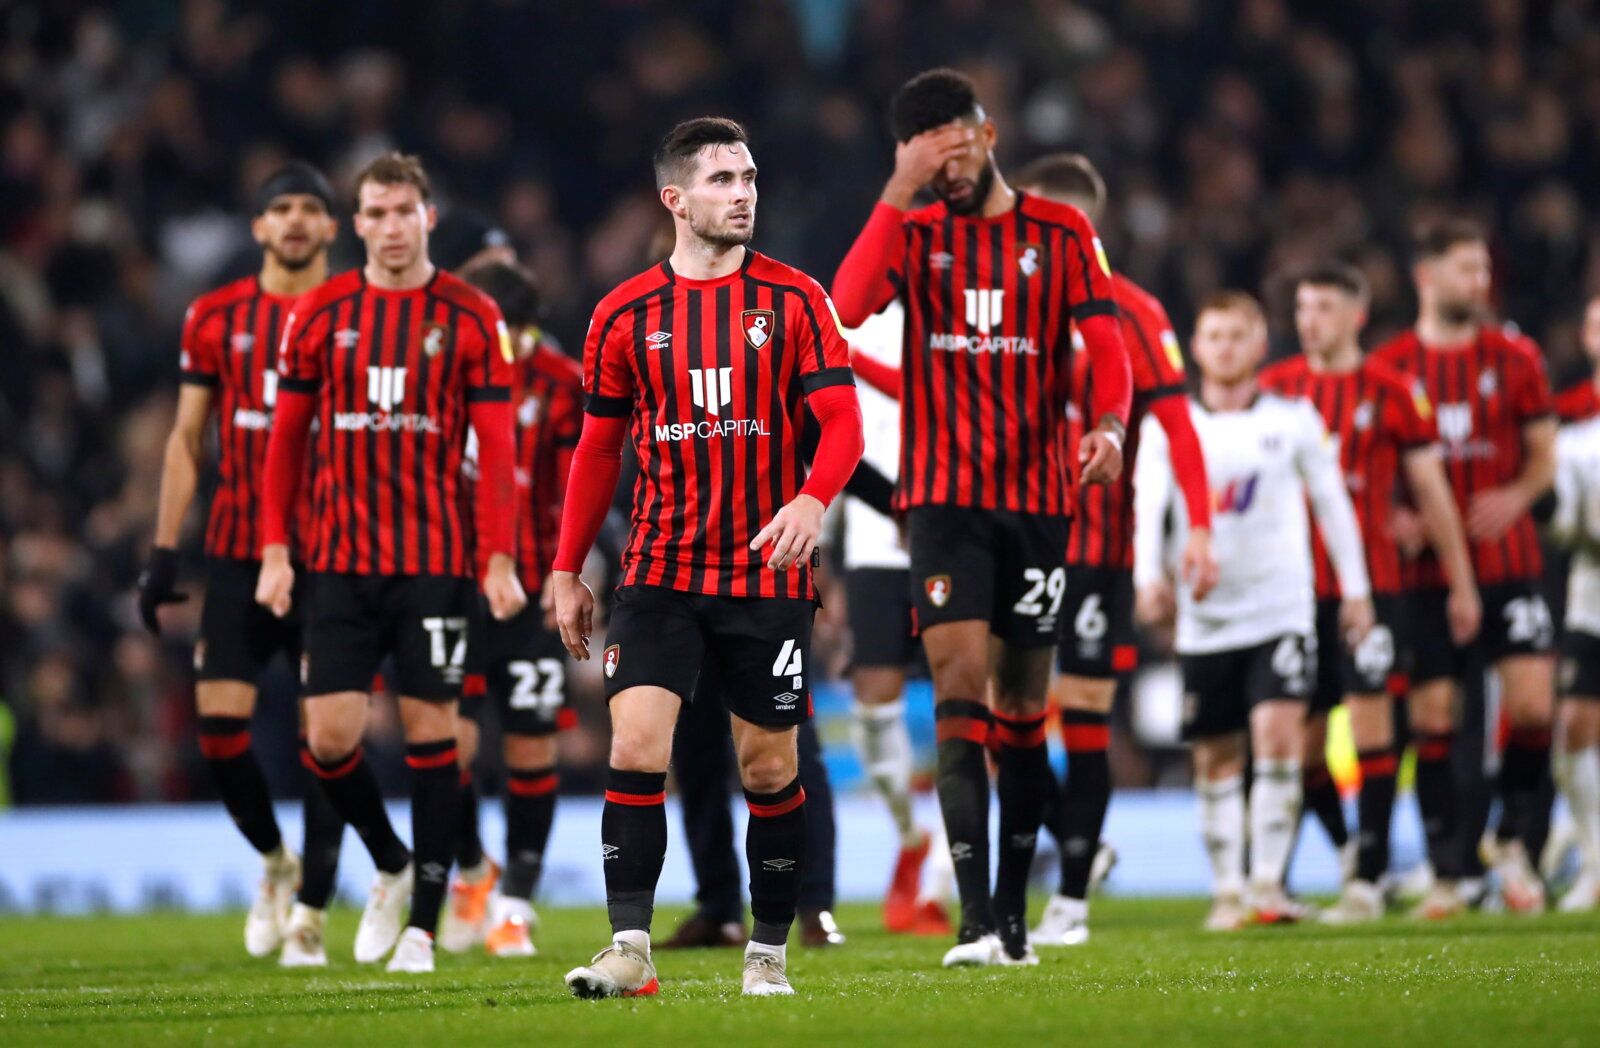 Soccer Football - Championship - Fulham v AFC Bournemouth - Craven Cottage, London, Britain - December 3, 2021 Bournemouth's players at the end of the match Action Images/Andrew Boyers  EDITORIAL USE ONLY. No use with unauthorized audio, video, data, fixture lists, club/league logos or 